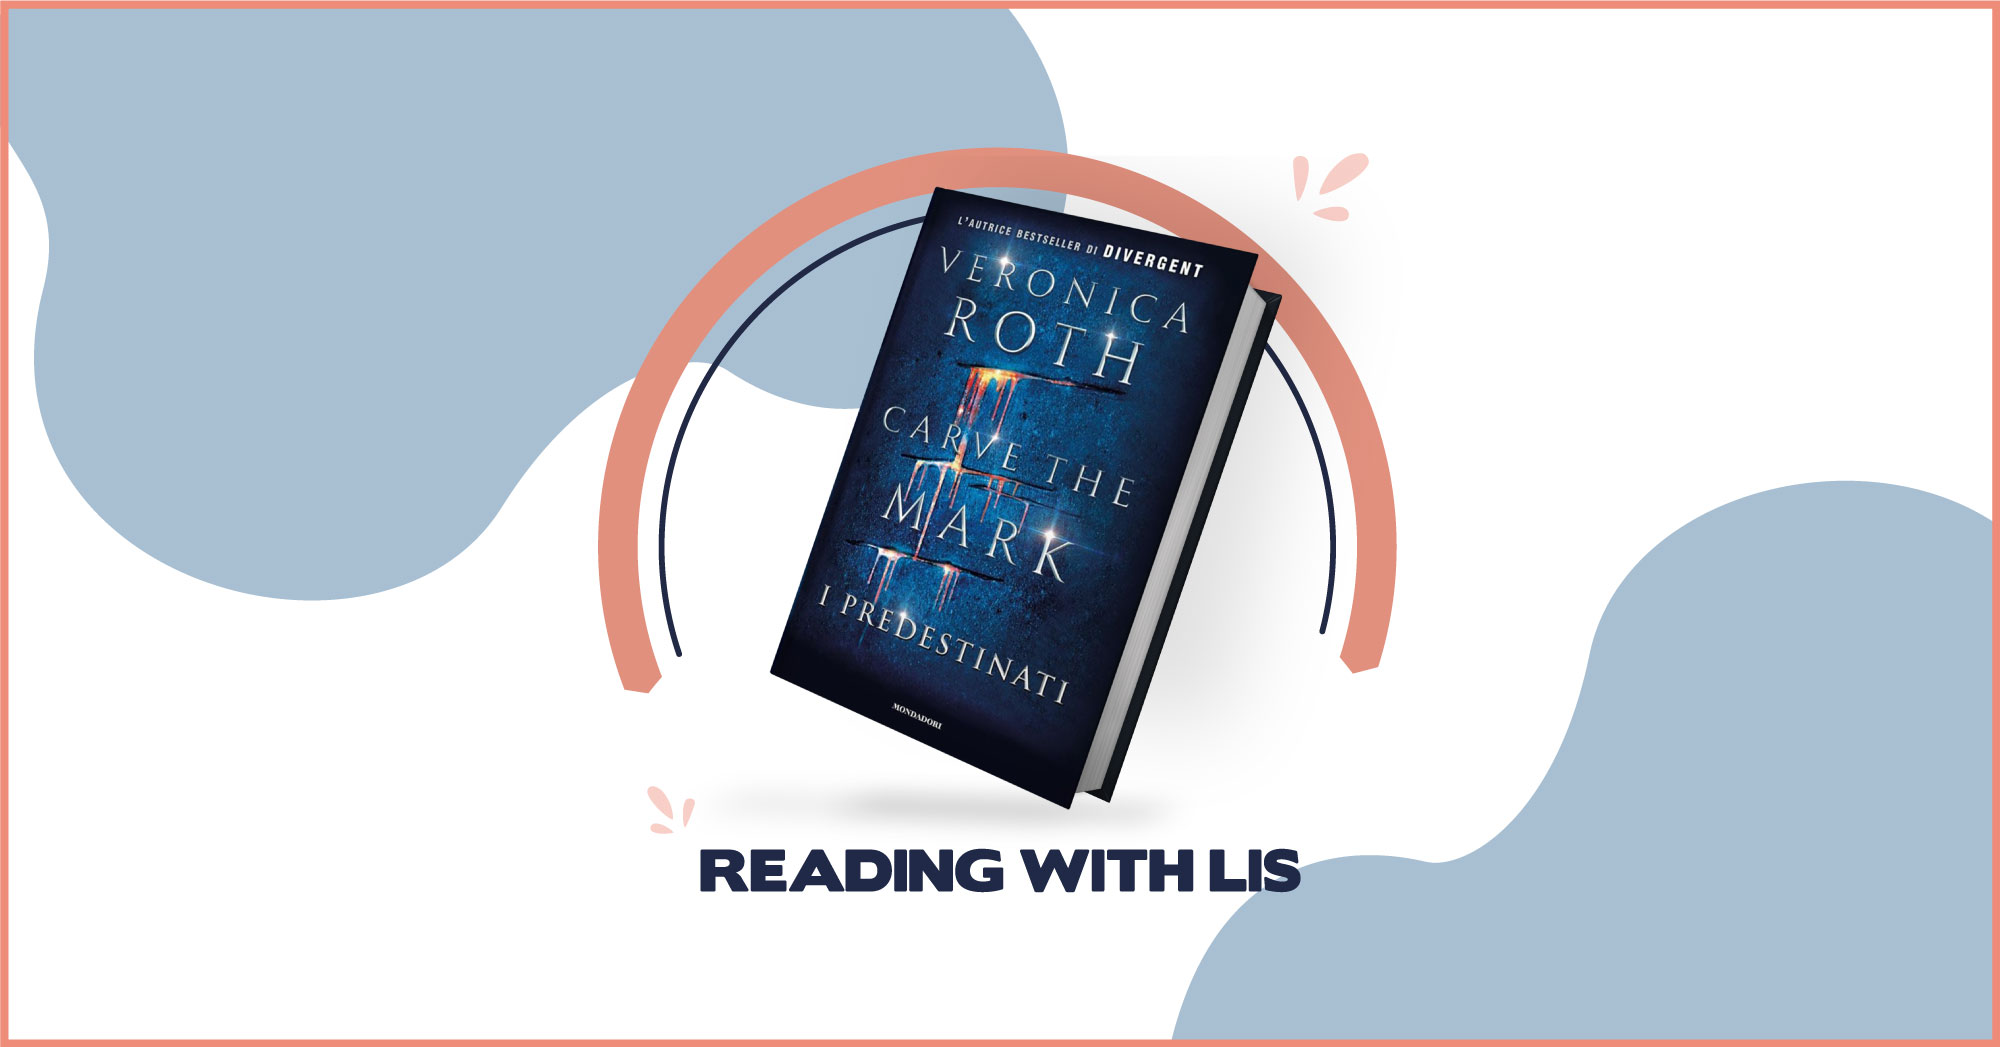 Reading with LIS: “Carve the mark” di Veronica Roth